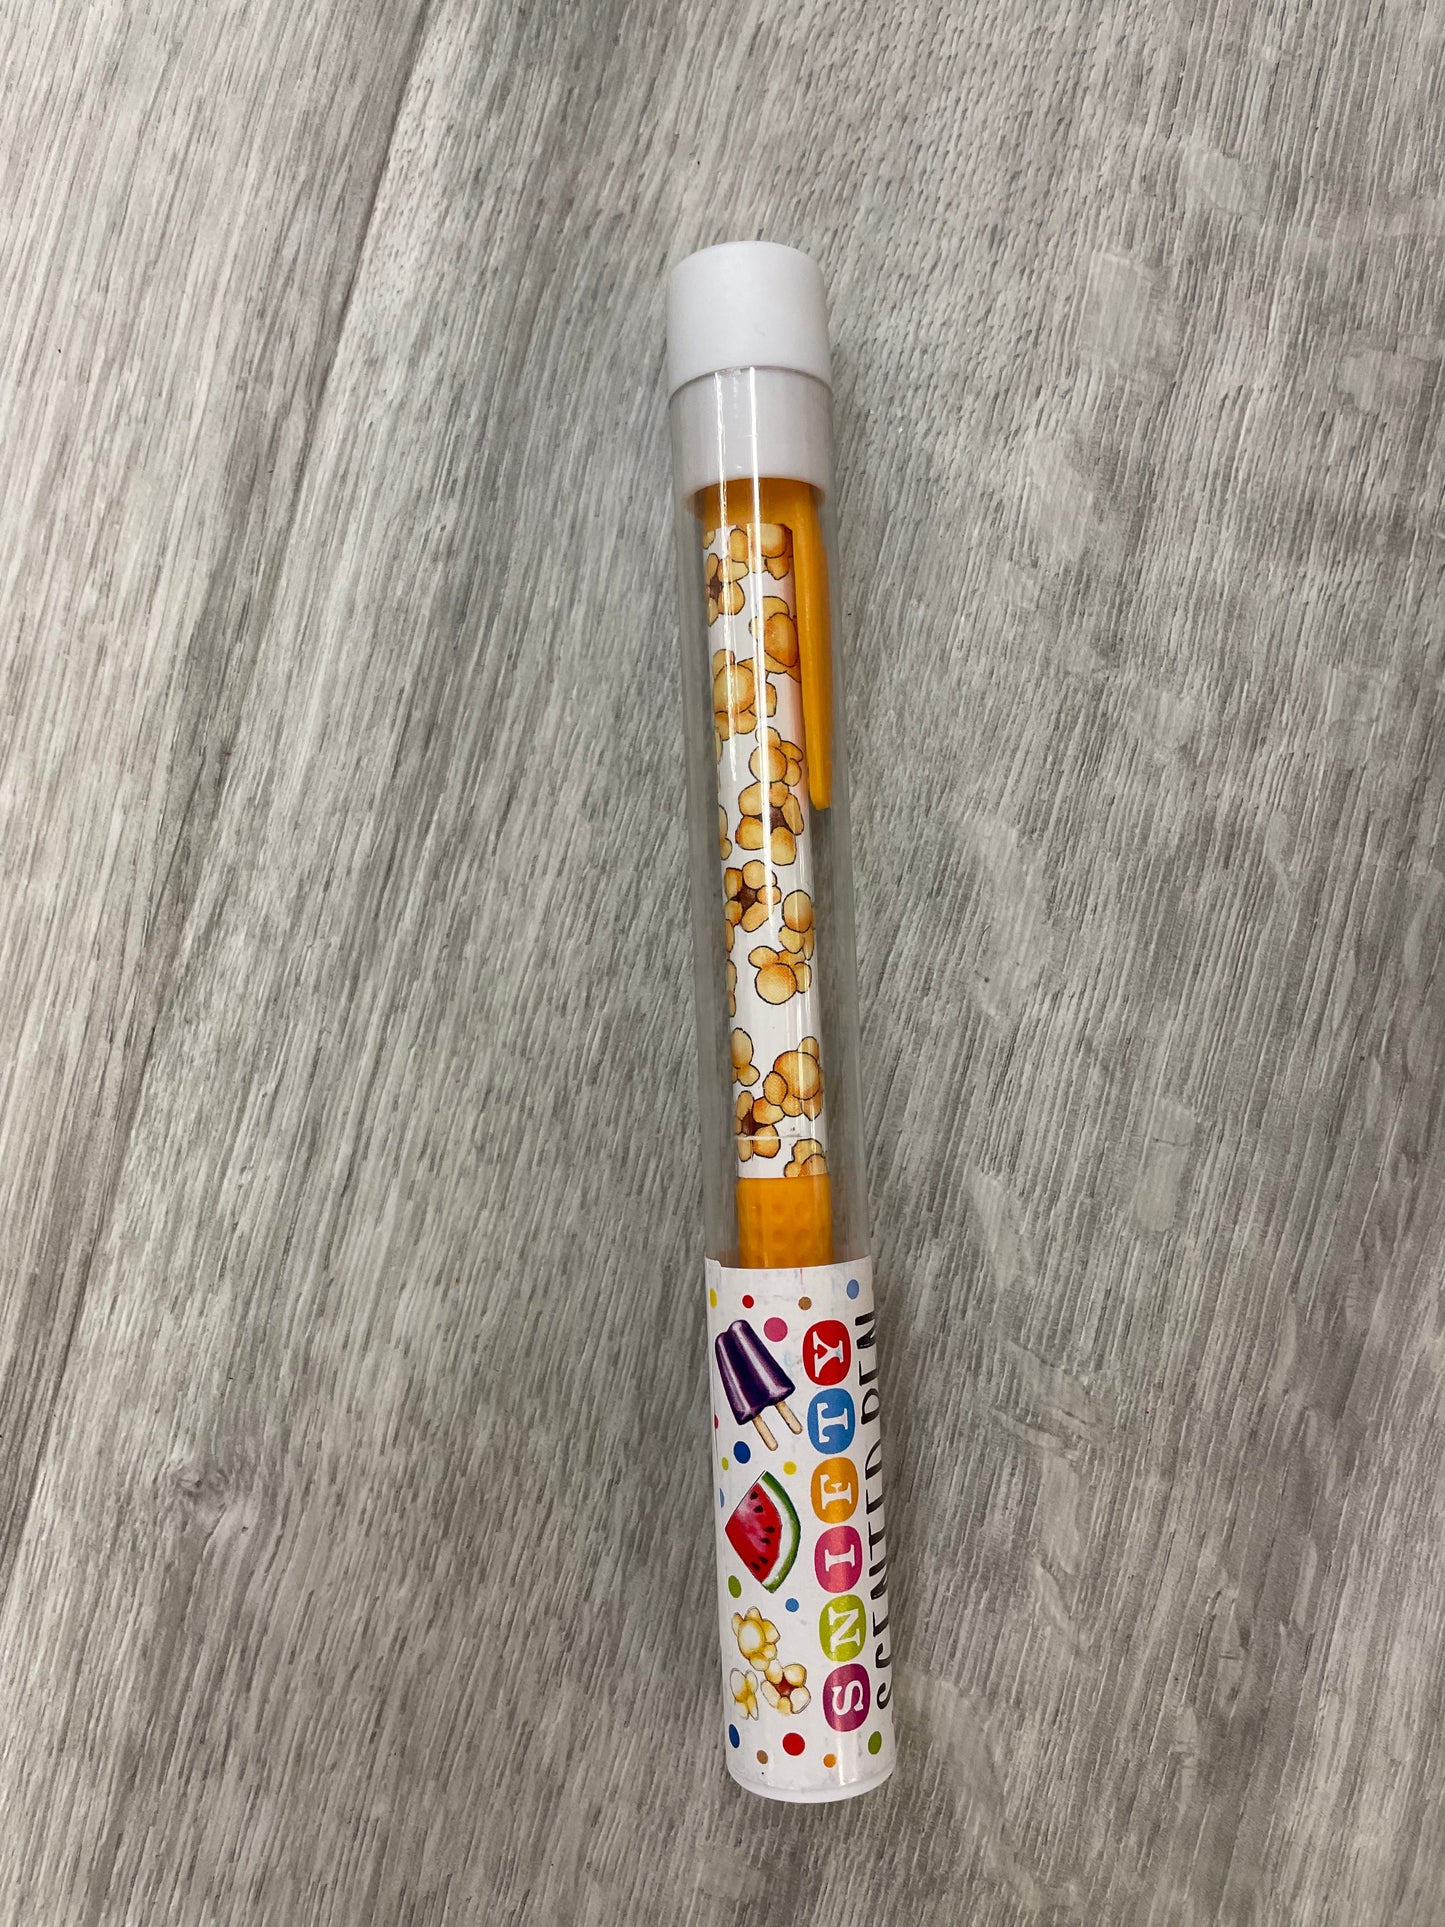 Snifty Pen In Tube Scented Treats